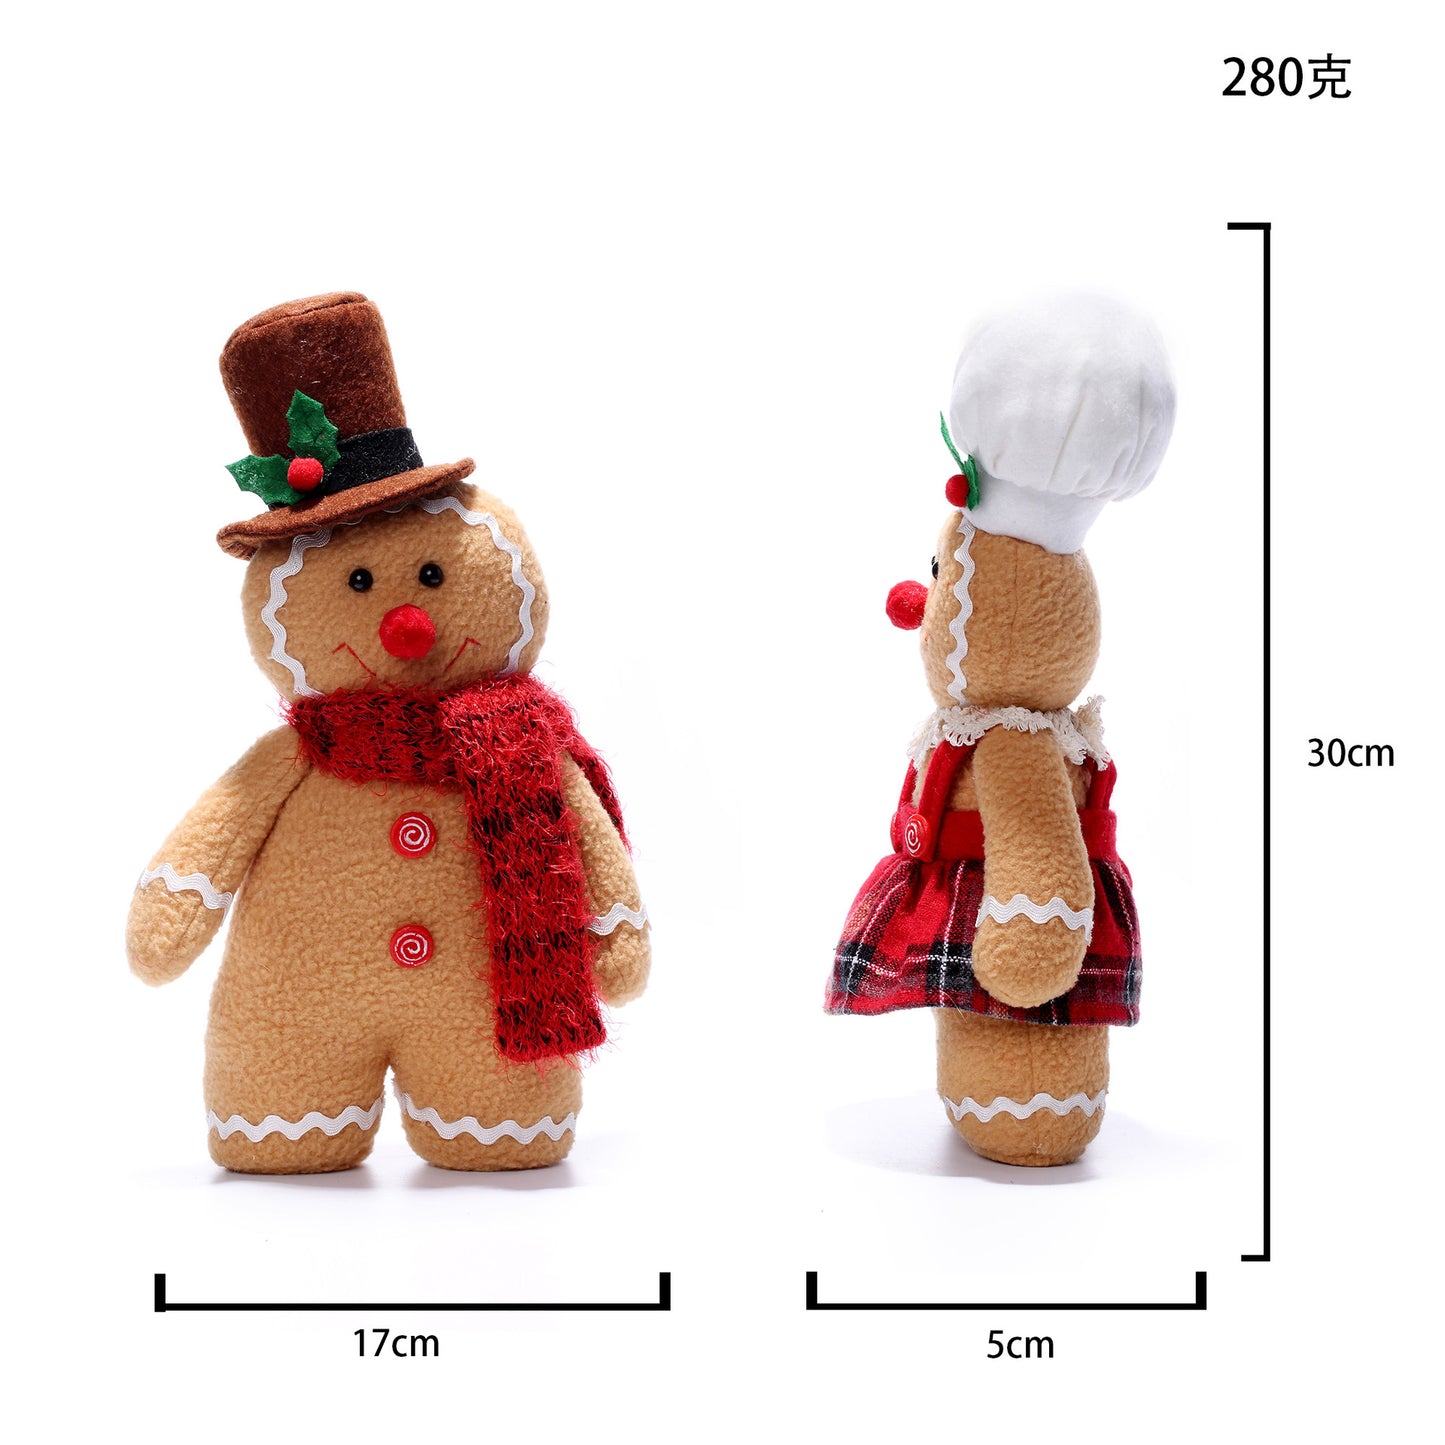 Mr and Mrs Gingerbread Man